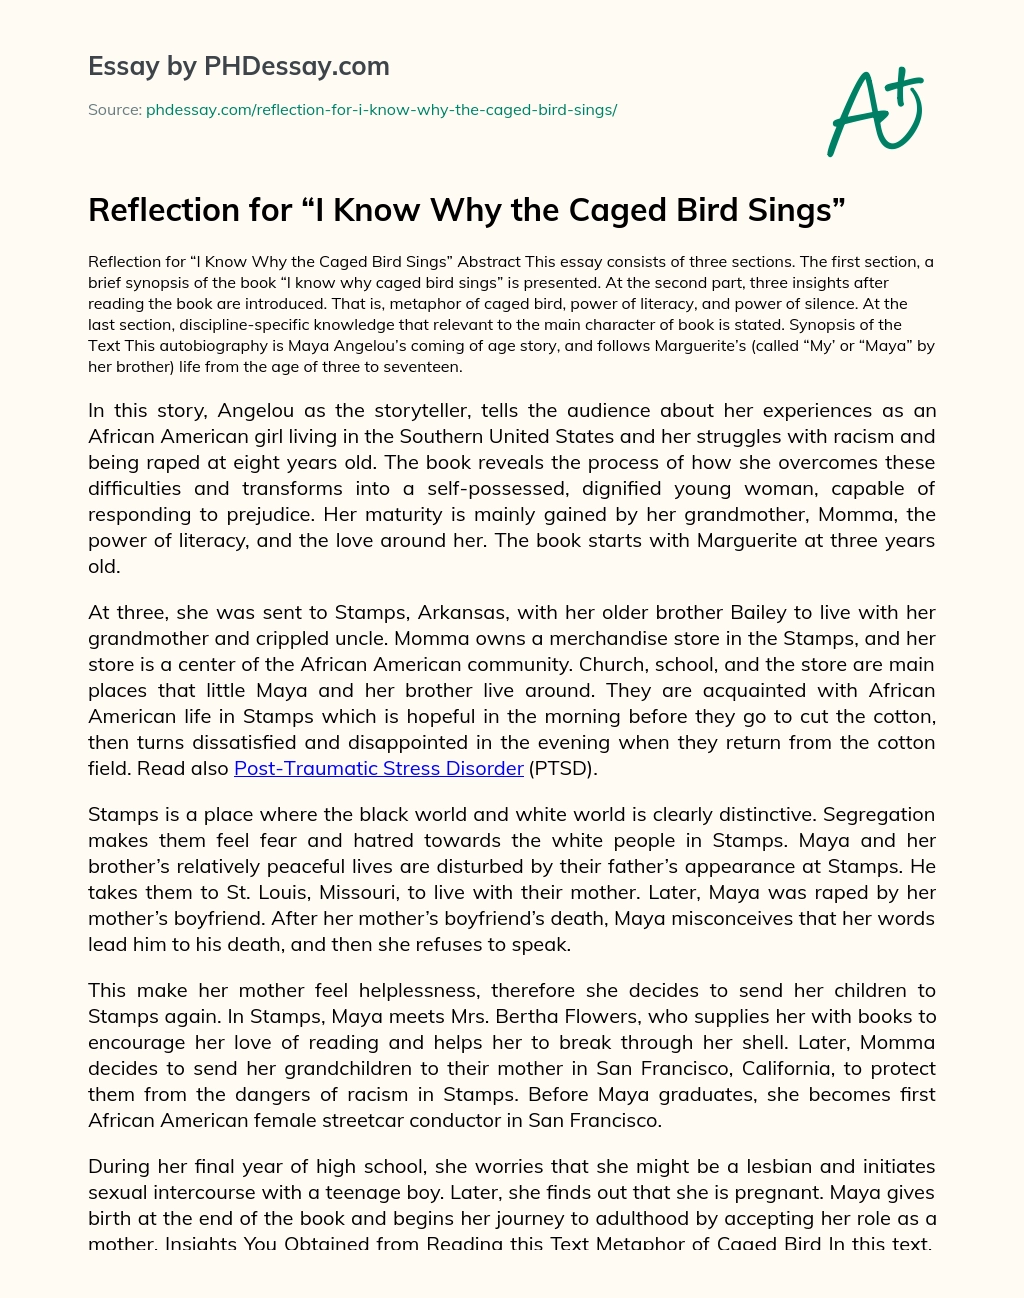 Reflection for “I Know Why the Caged Bird Sings” essay